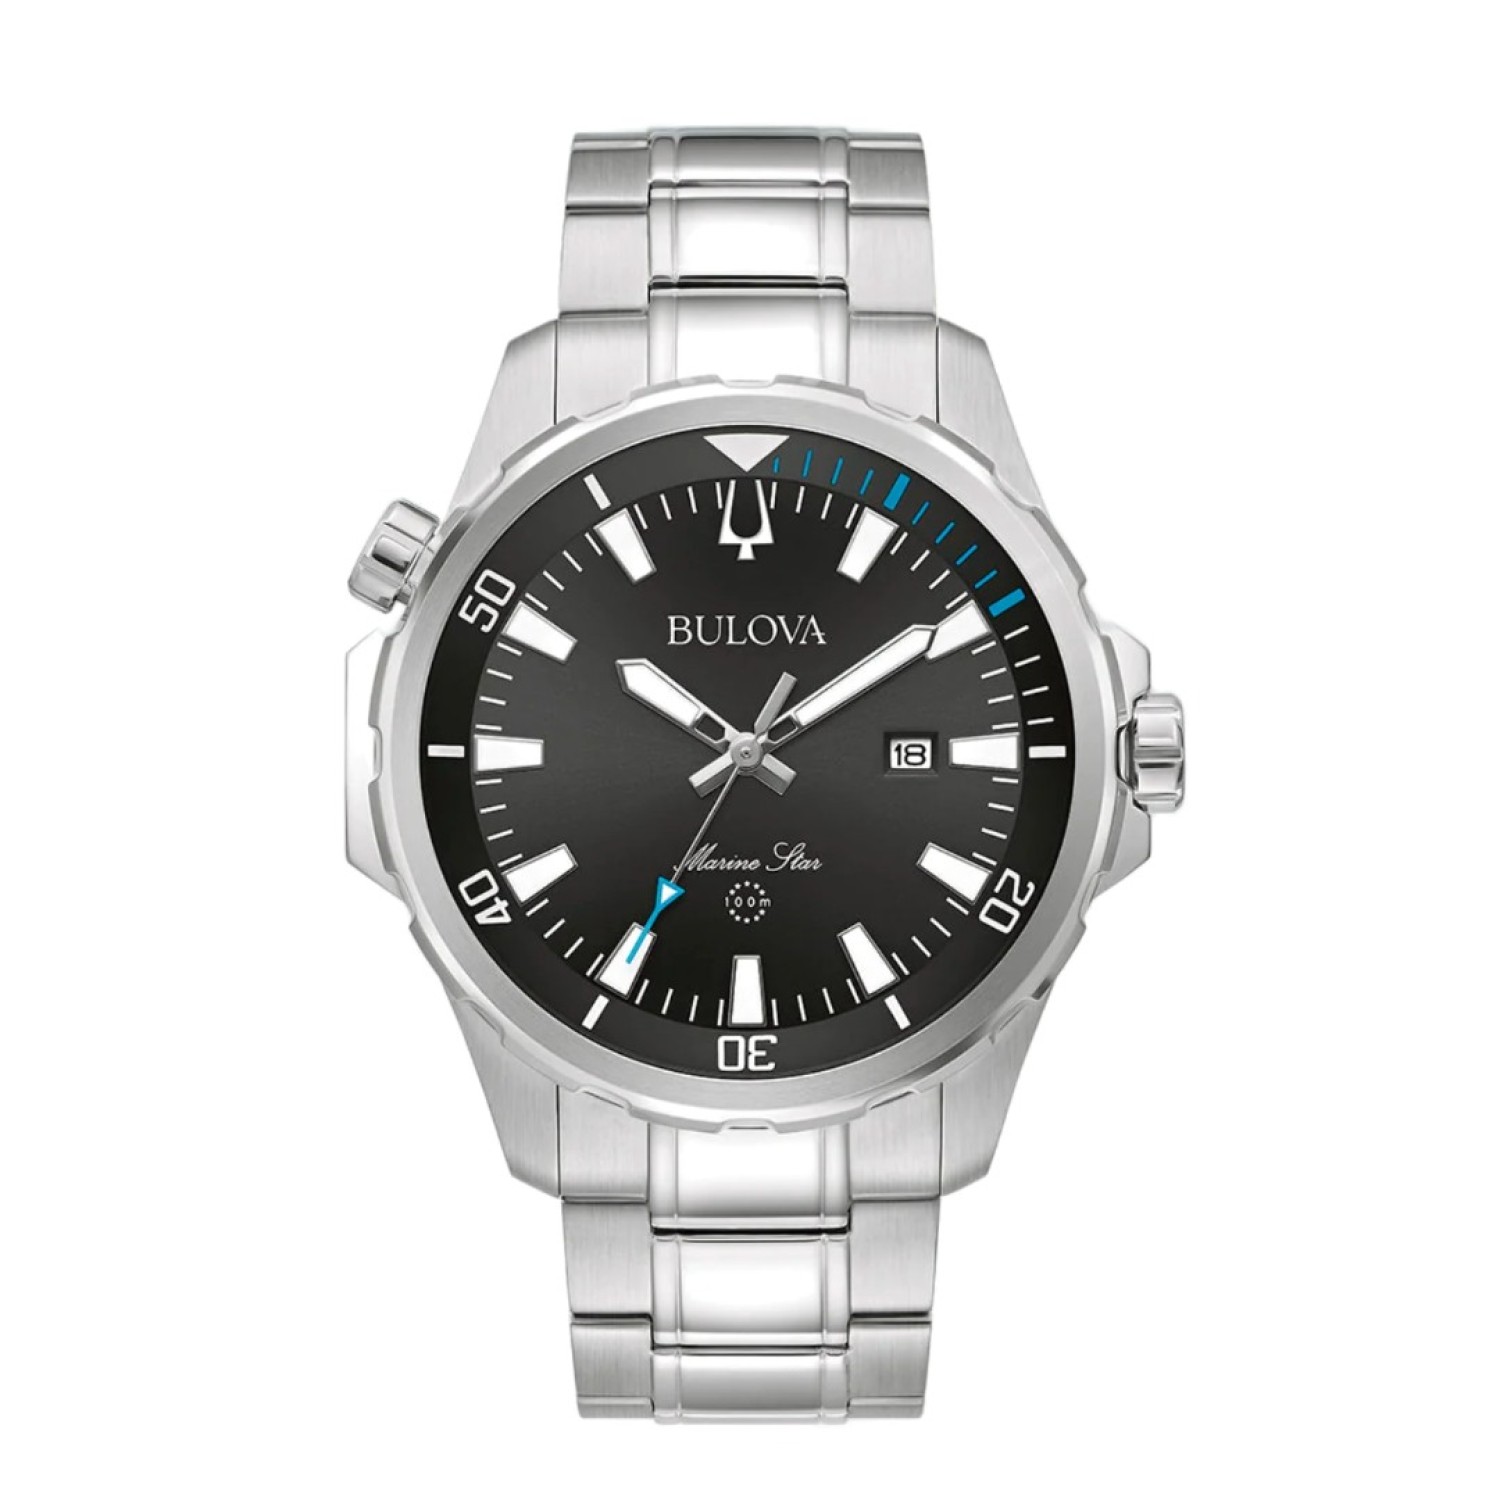 96B382 Bulova Mens Marine Star Watch. Elevate your style with the new Marine Star men's watch from the Marine Star Collection.